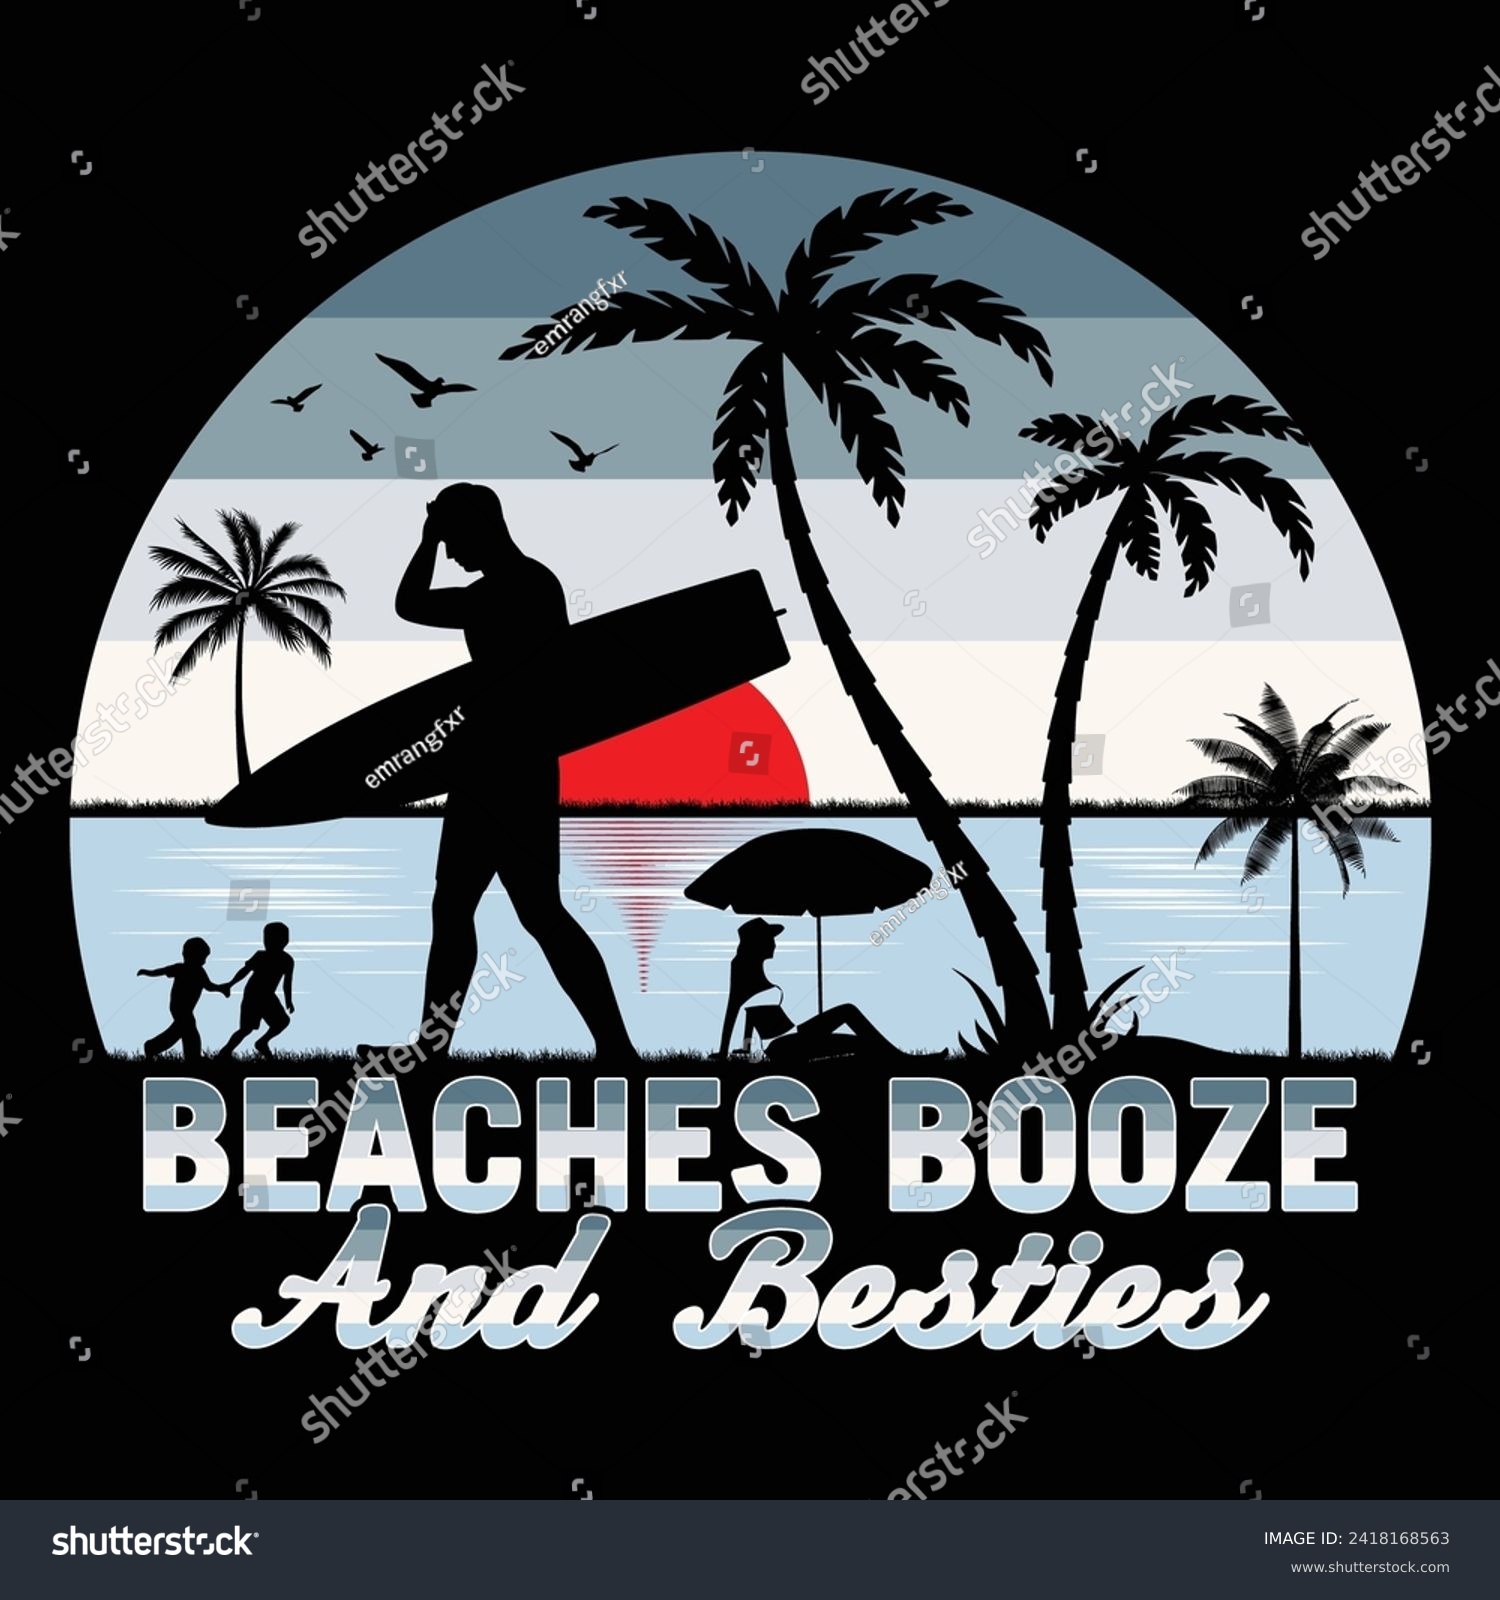 SVG of Beaches Booze And Besties Surfing Beach Sunset Summer Sublimation T-Shirt Design svg